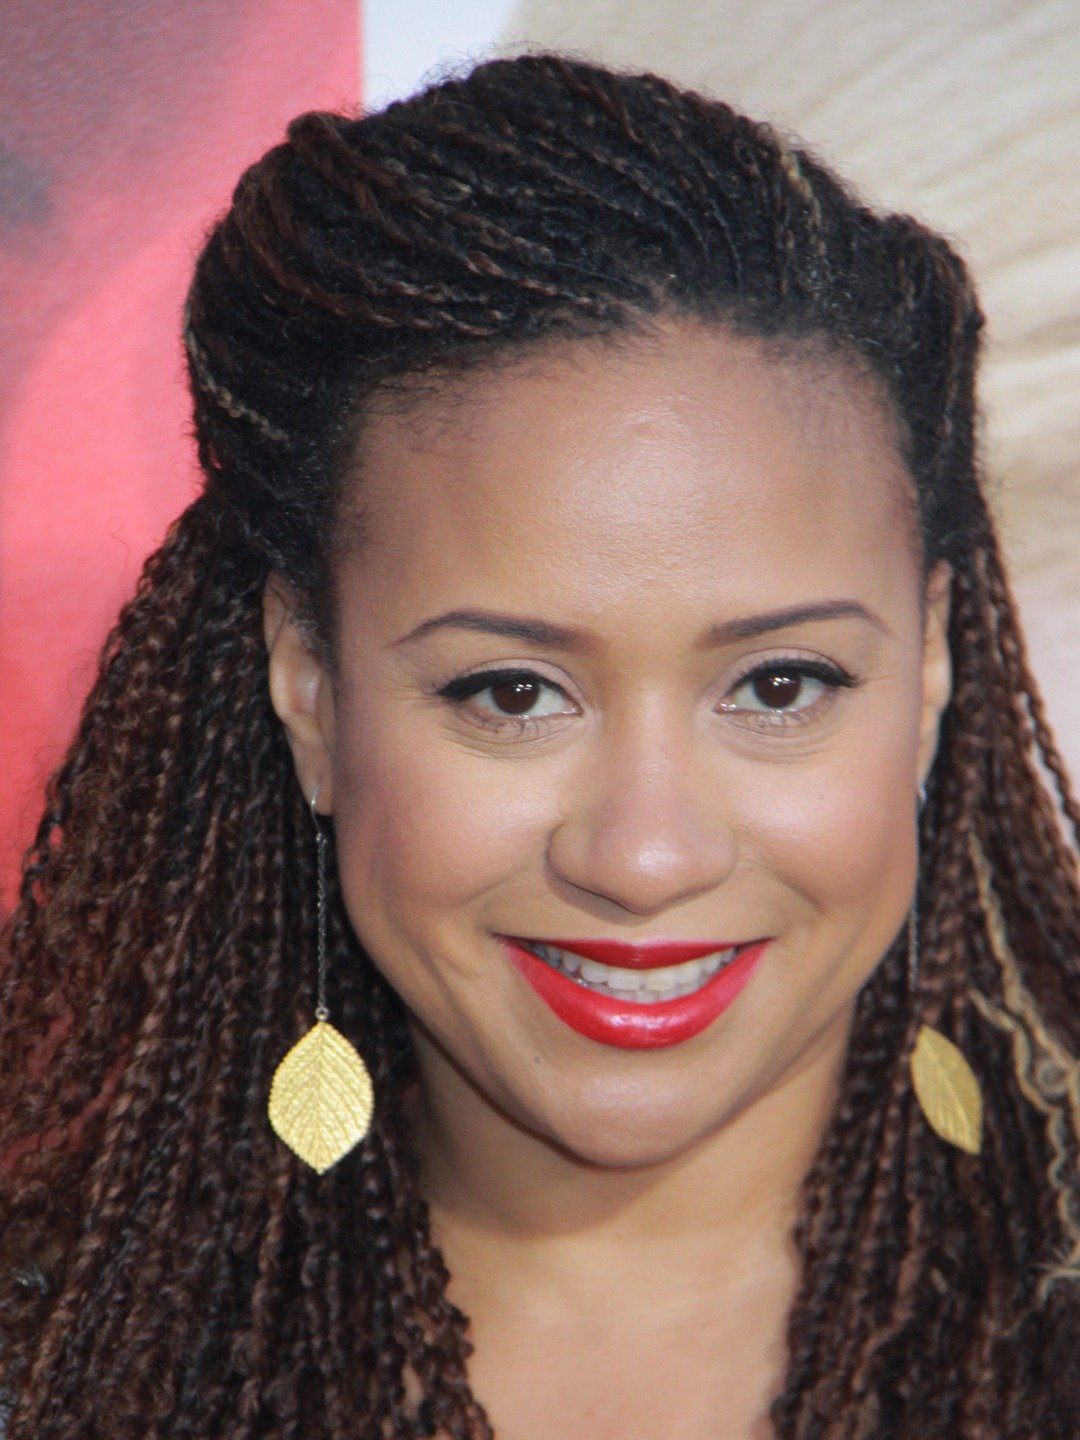 How tall is Tracie Thoms?